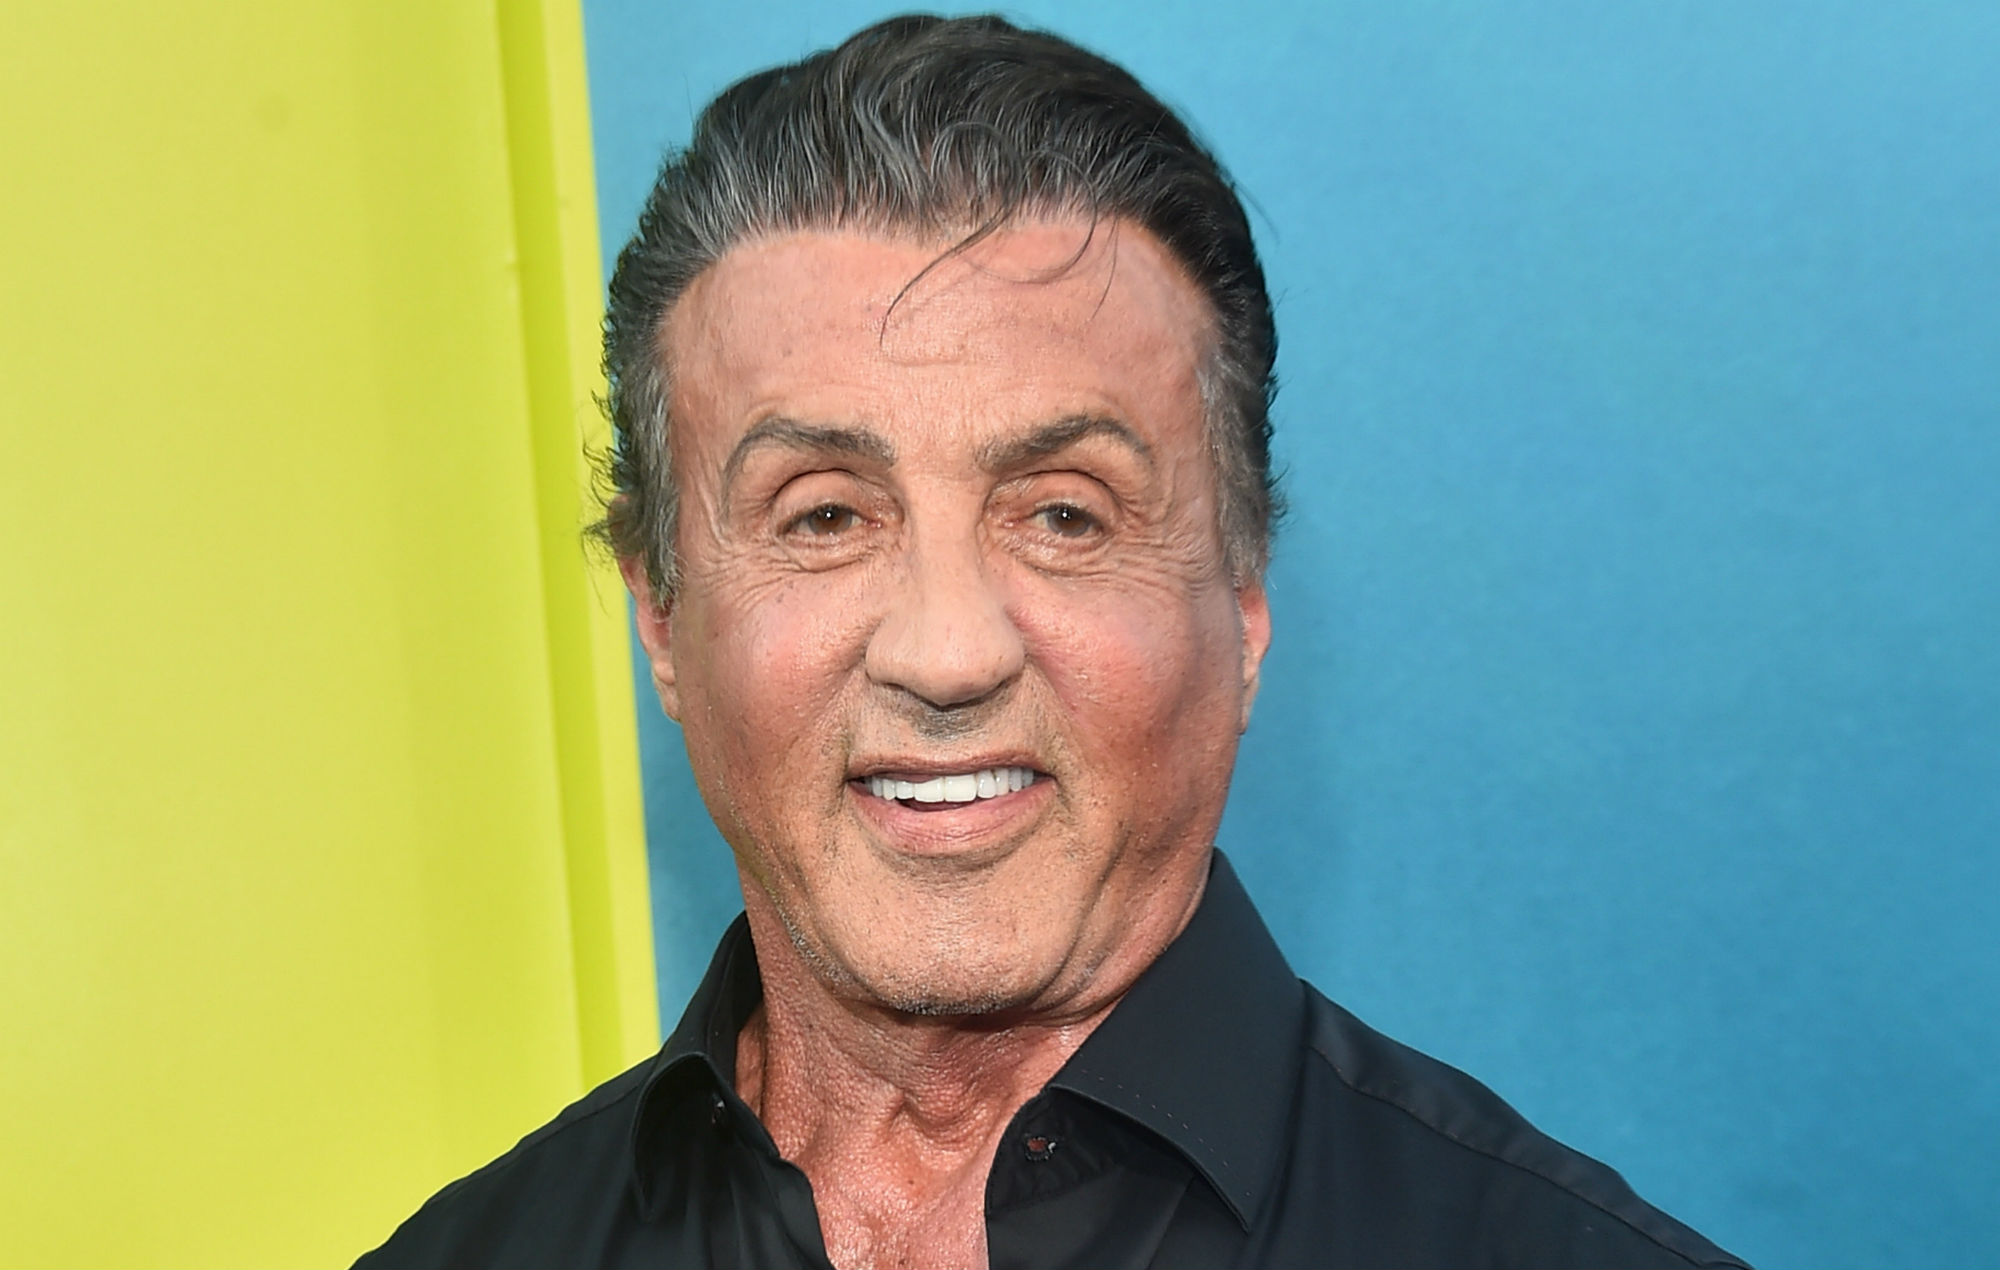 Sylvester Stallone Wiki, Bio, Age, Net Worth, and Other Facts